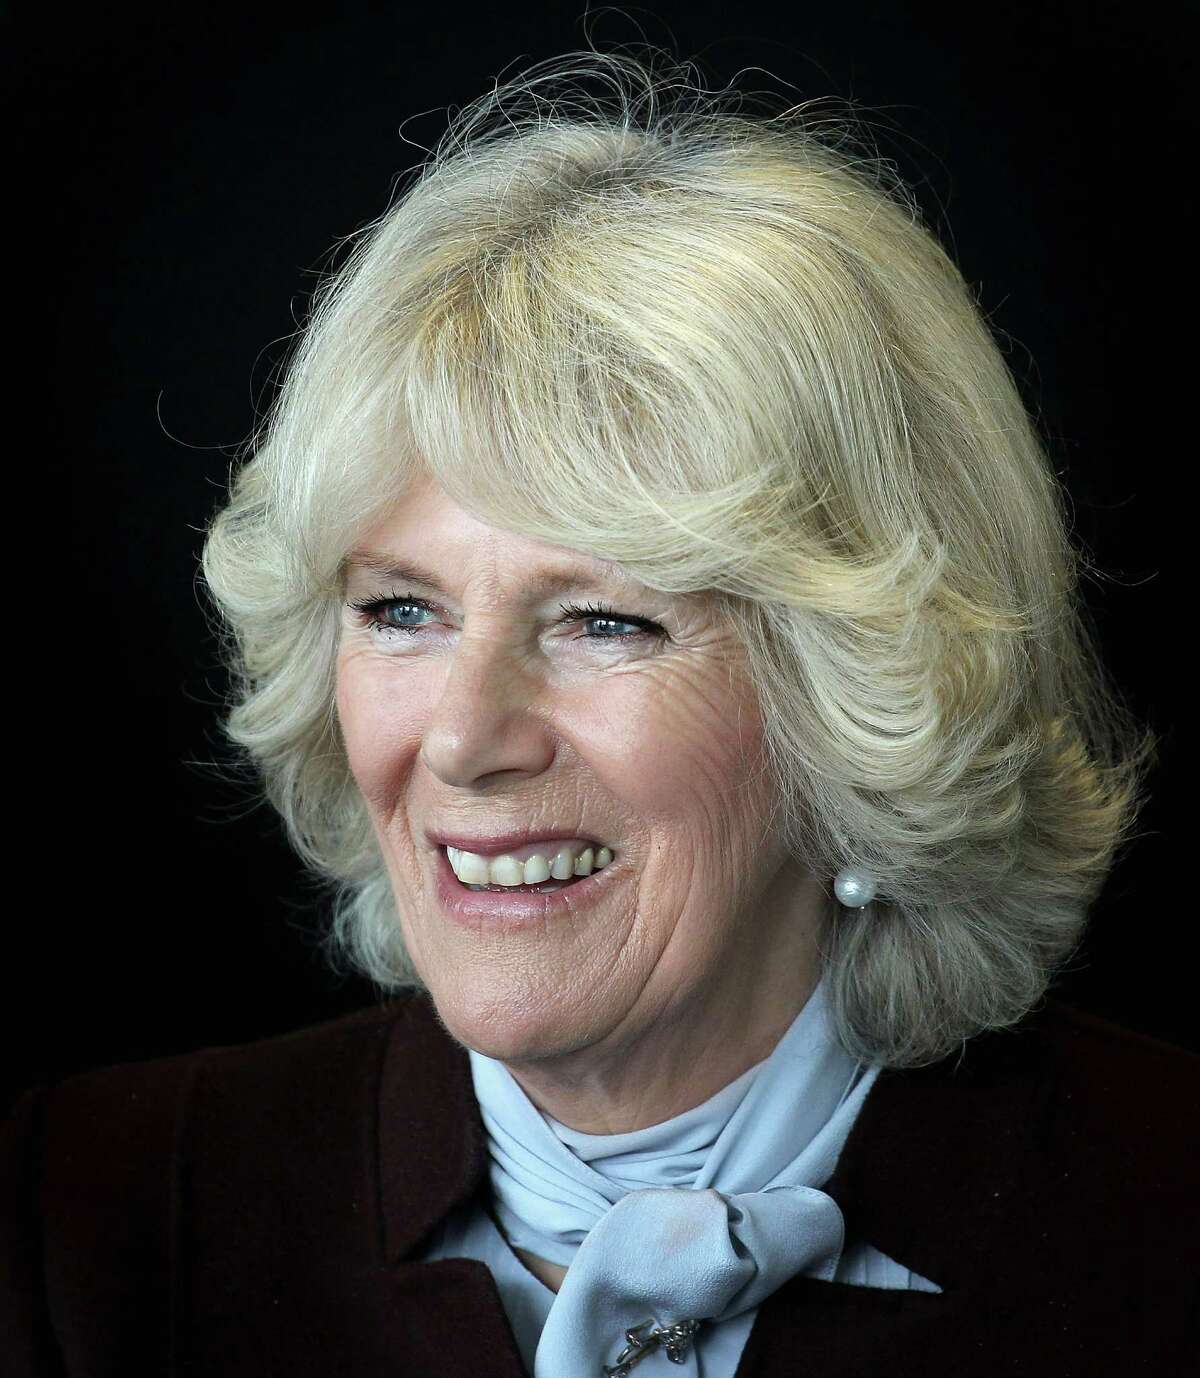 Camilla, the Duchess of Cornwall has become an integral part of the royal family since she married Prince Charles in 2005.